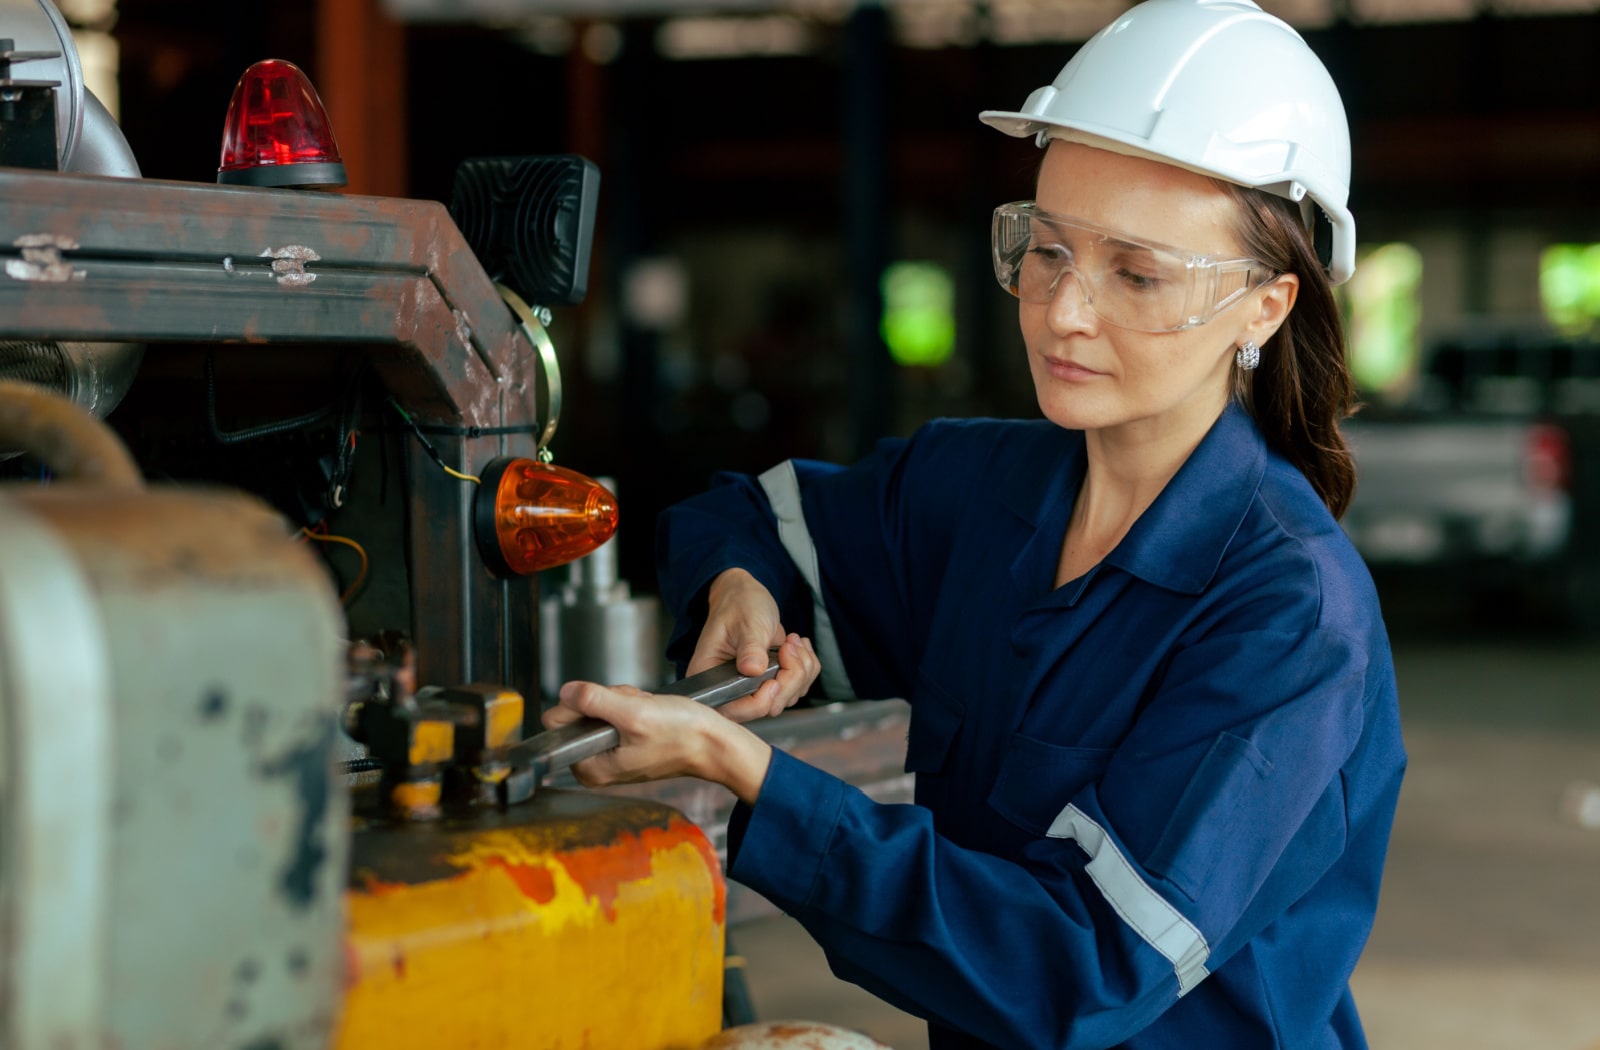 A female mechanical engineer working while wearing prescription safety glasses